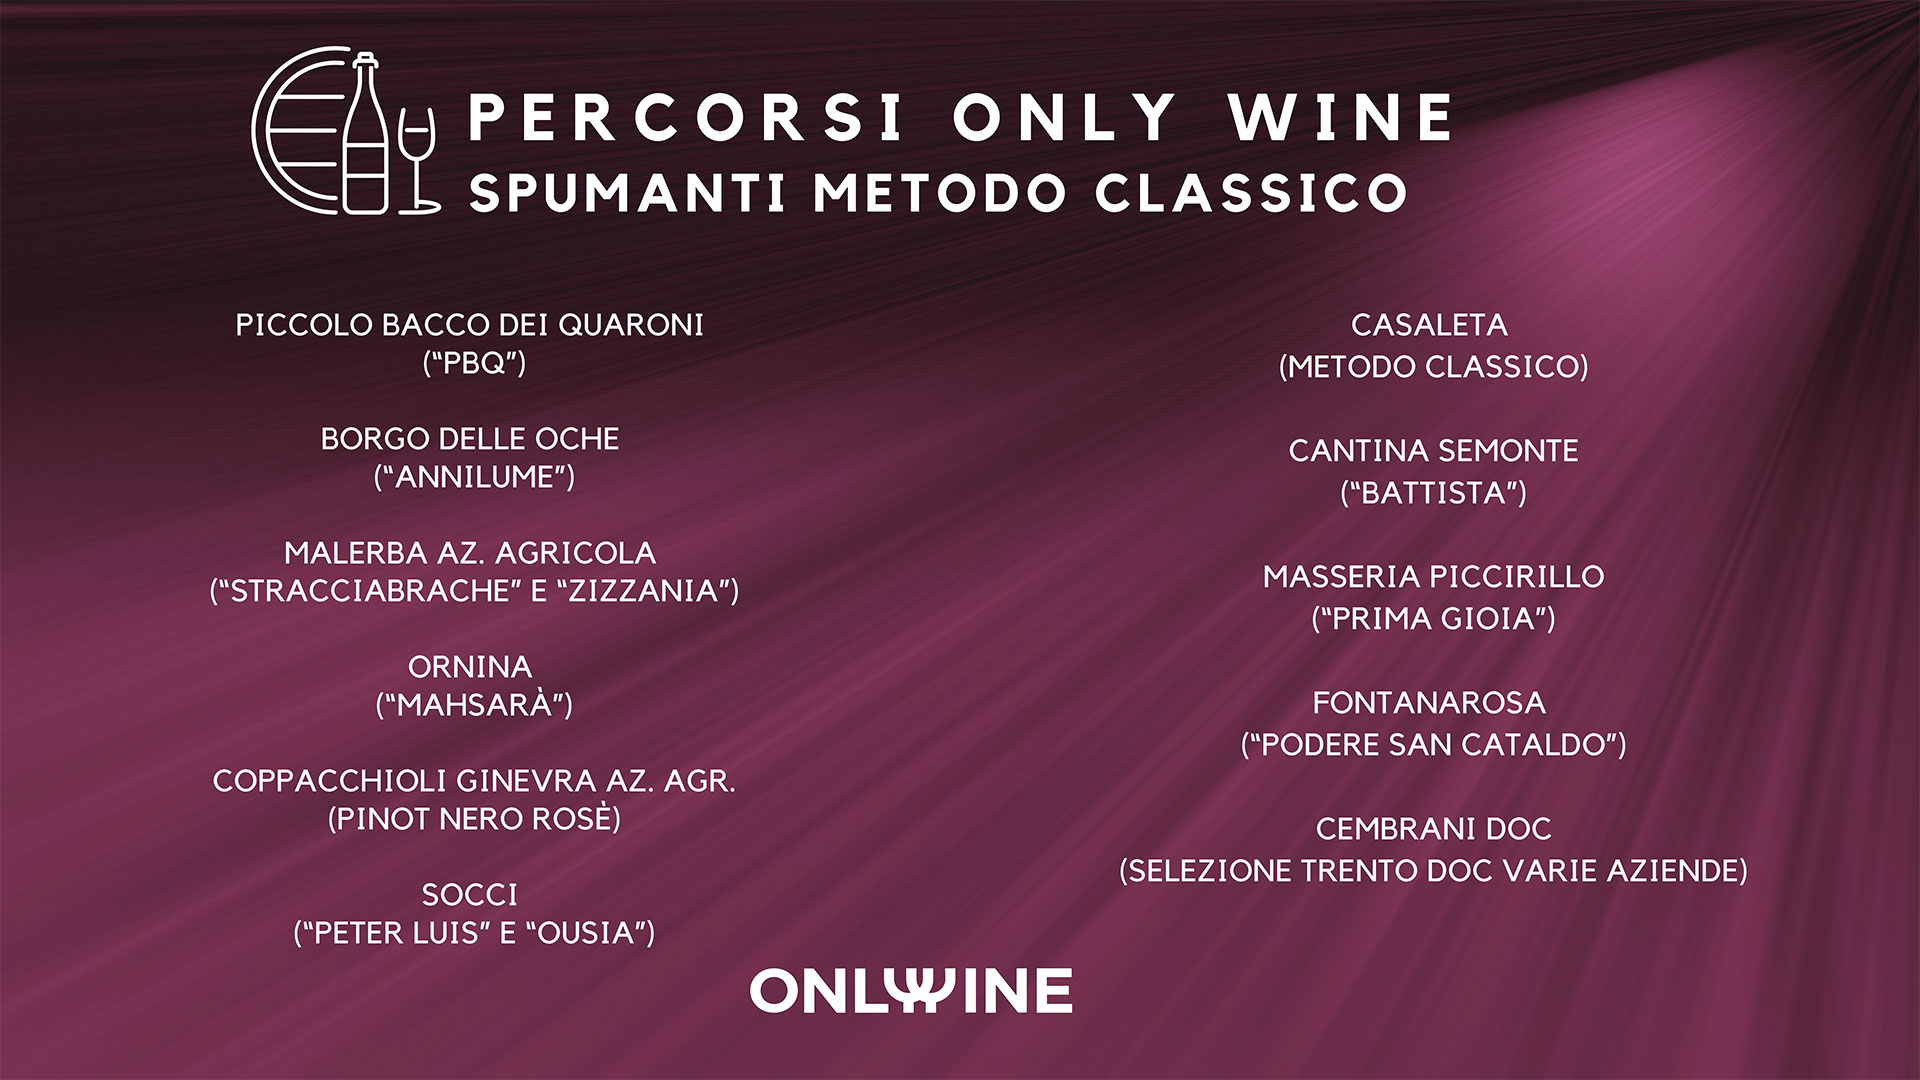 PERCORSI-ONLY-WINE-3